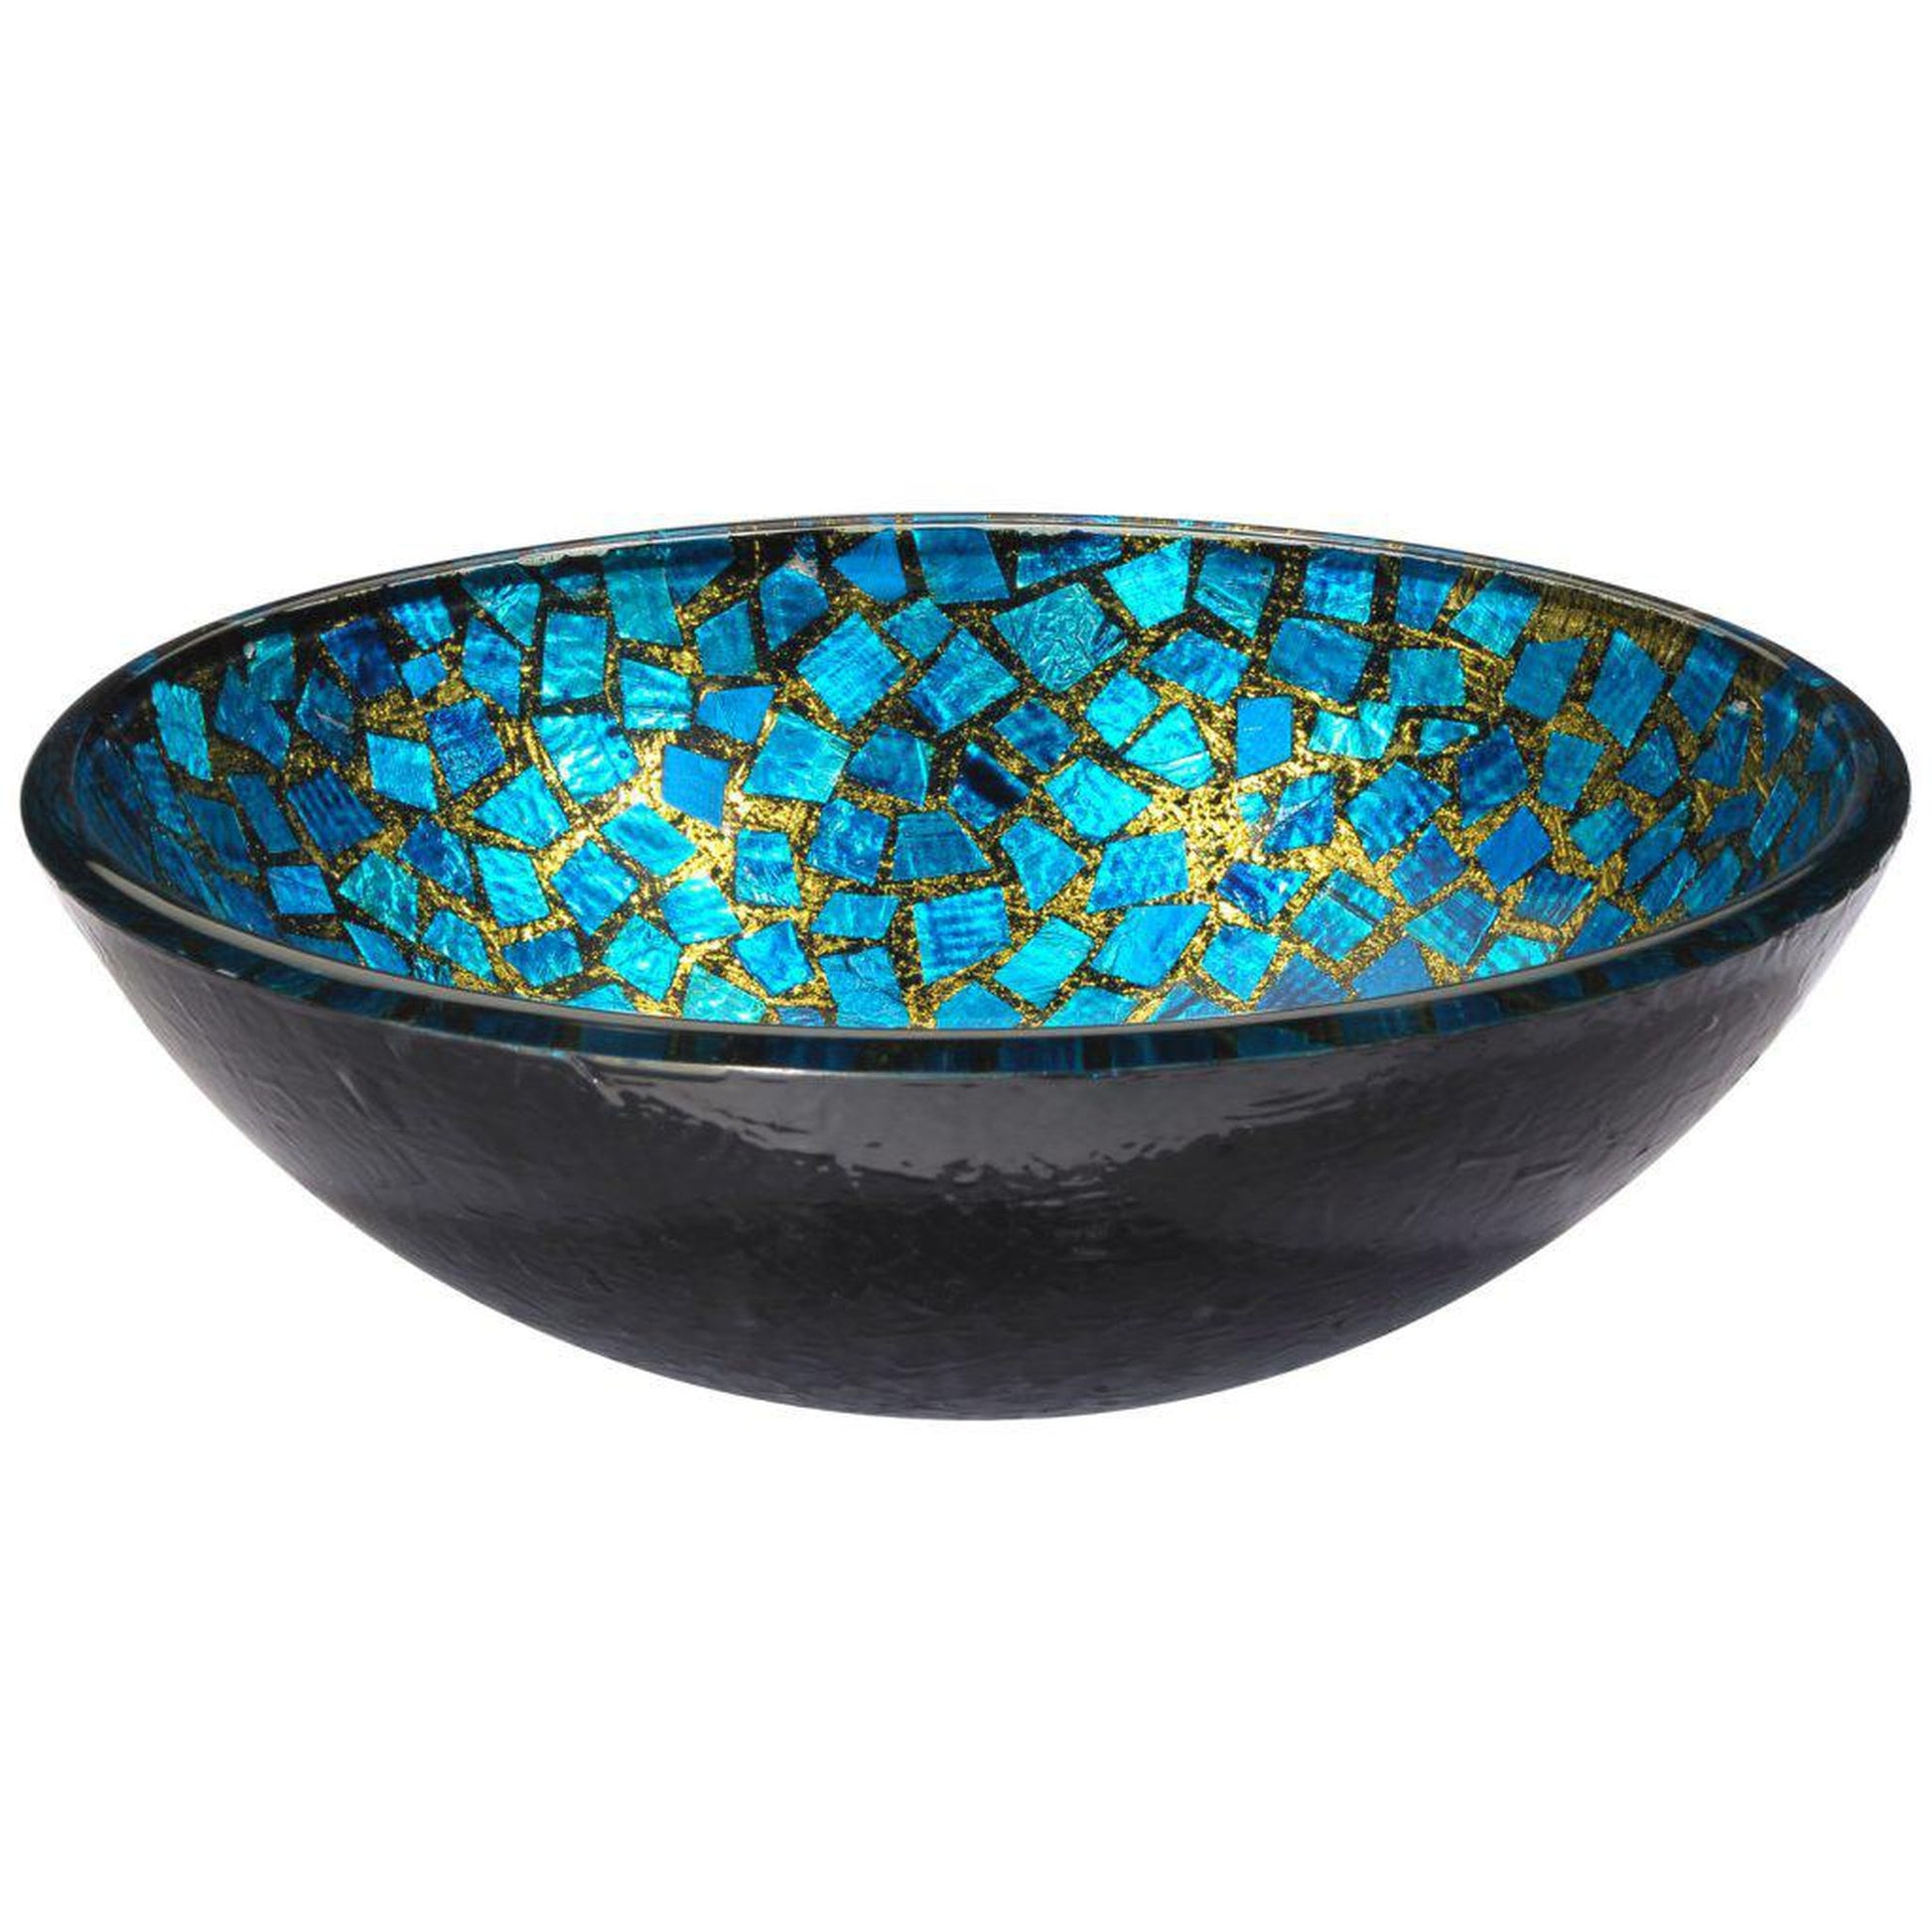 ANZZI Chipasi Series 17" x 17" Round Blue and Gold Mosaic Deco-Glass Vessel Sink With Polished Chrome Pop-Up Drain